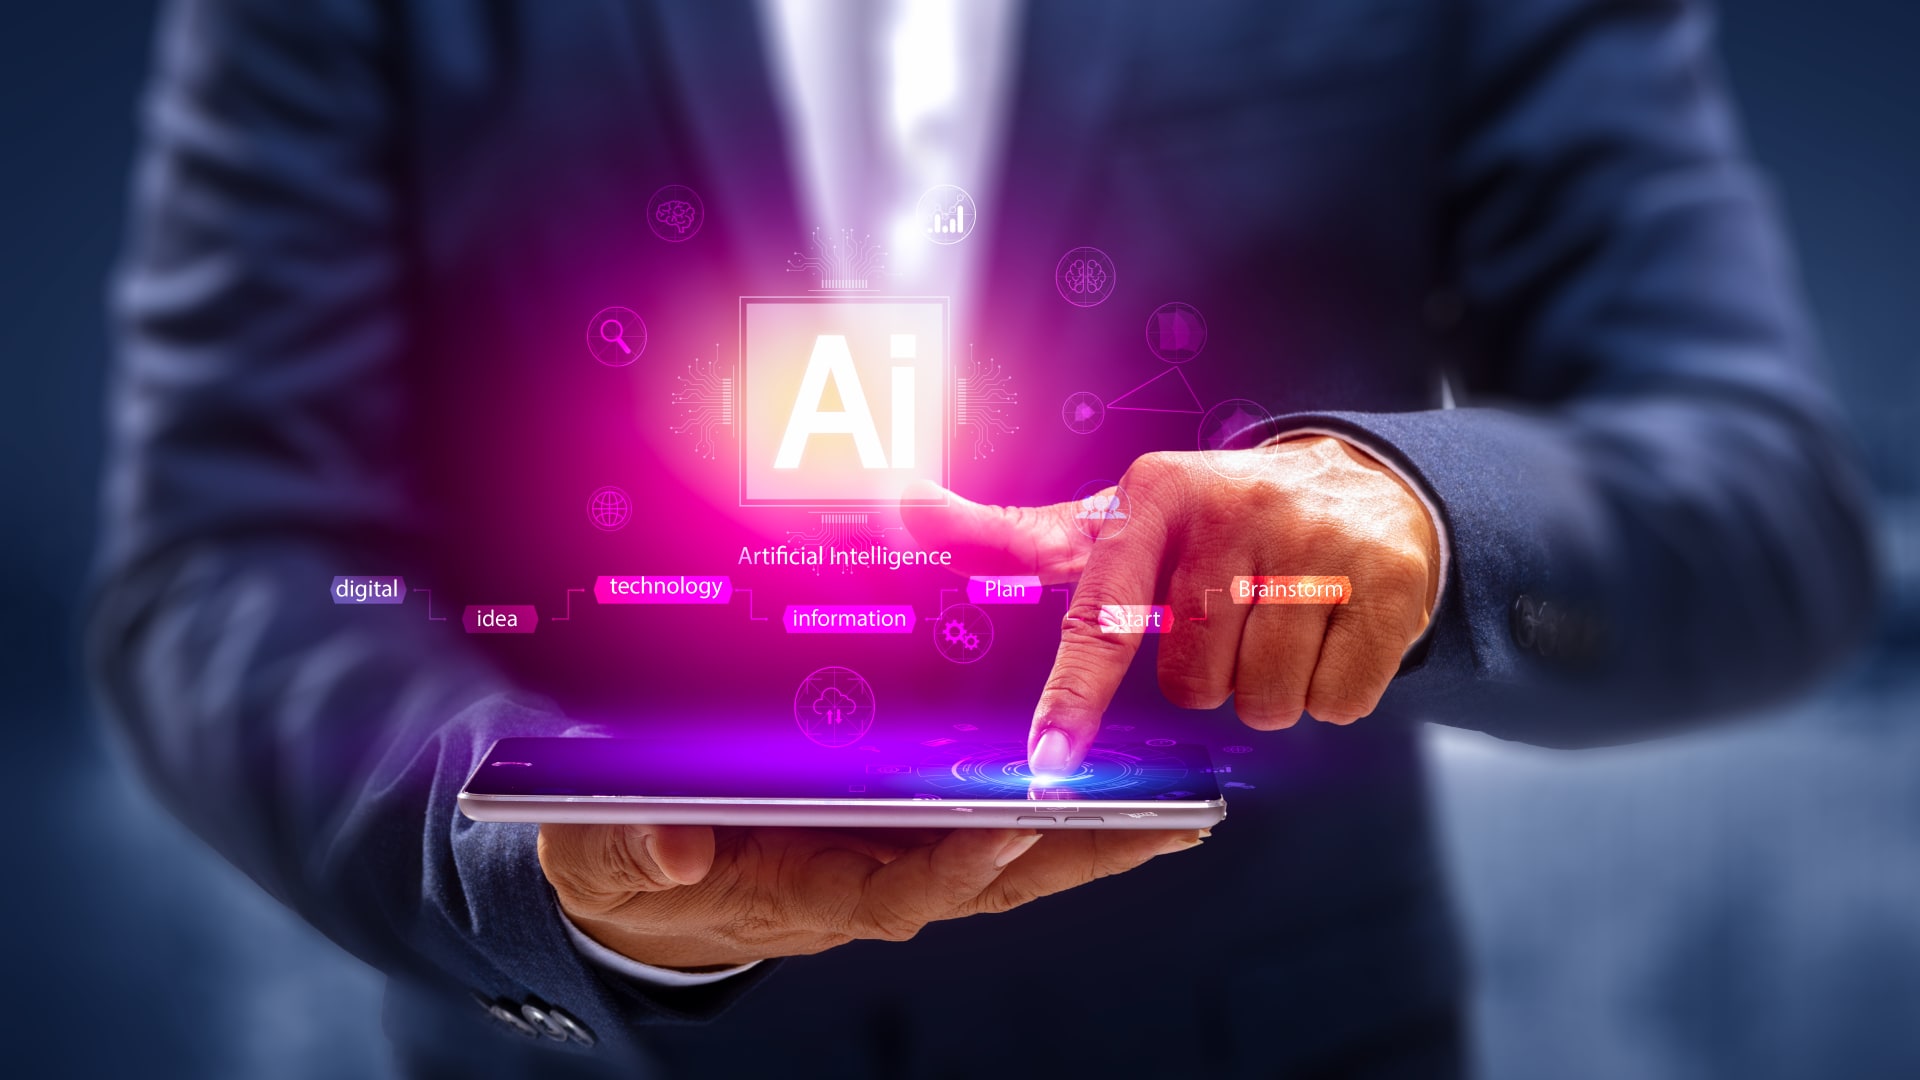 World’s first major act to regulate AI passed by the European parliament